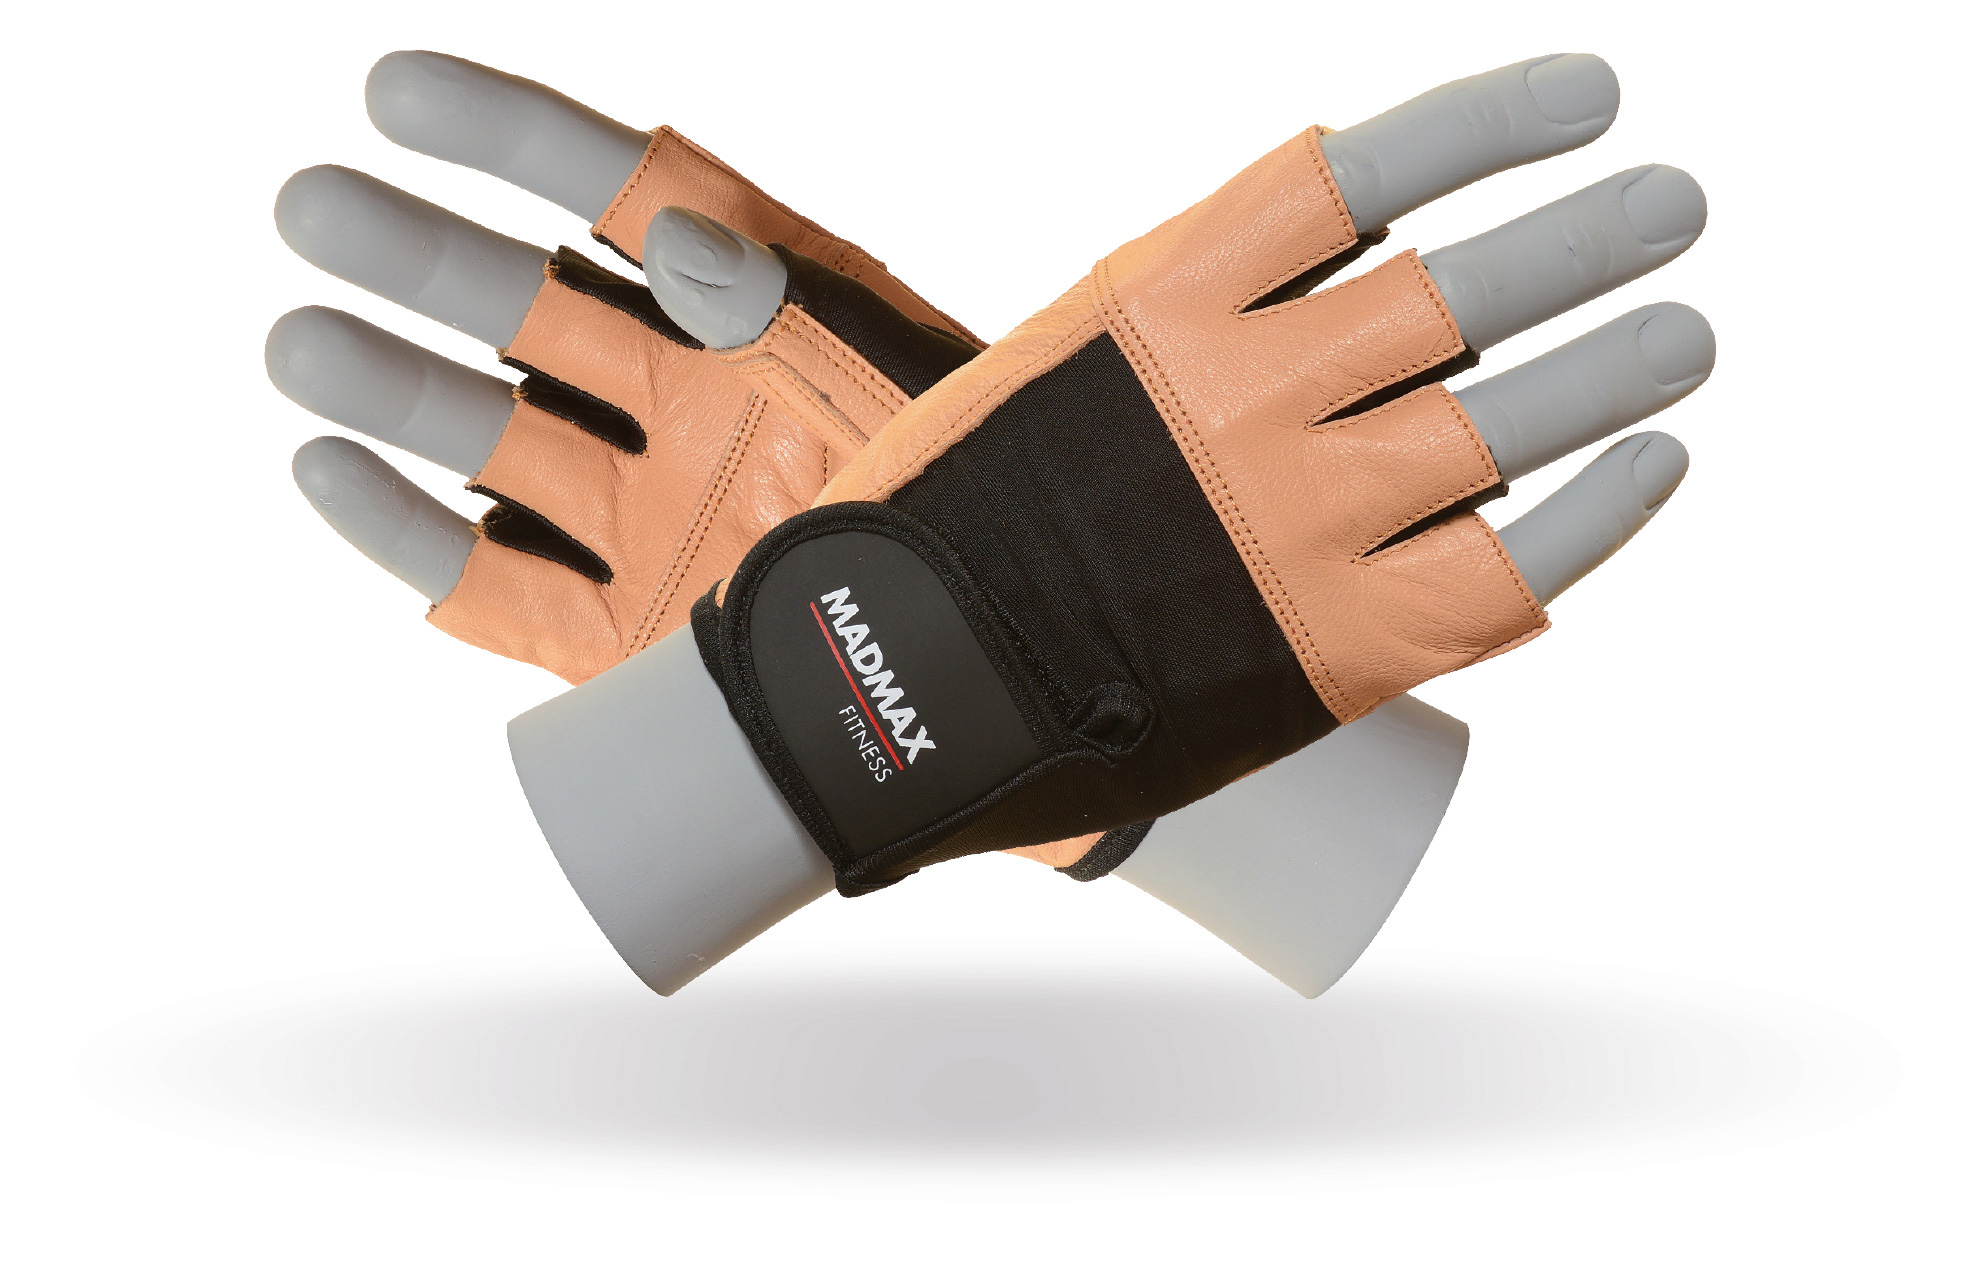 MAD MAX MFG-444 fitness brown gloves